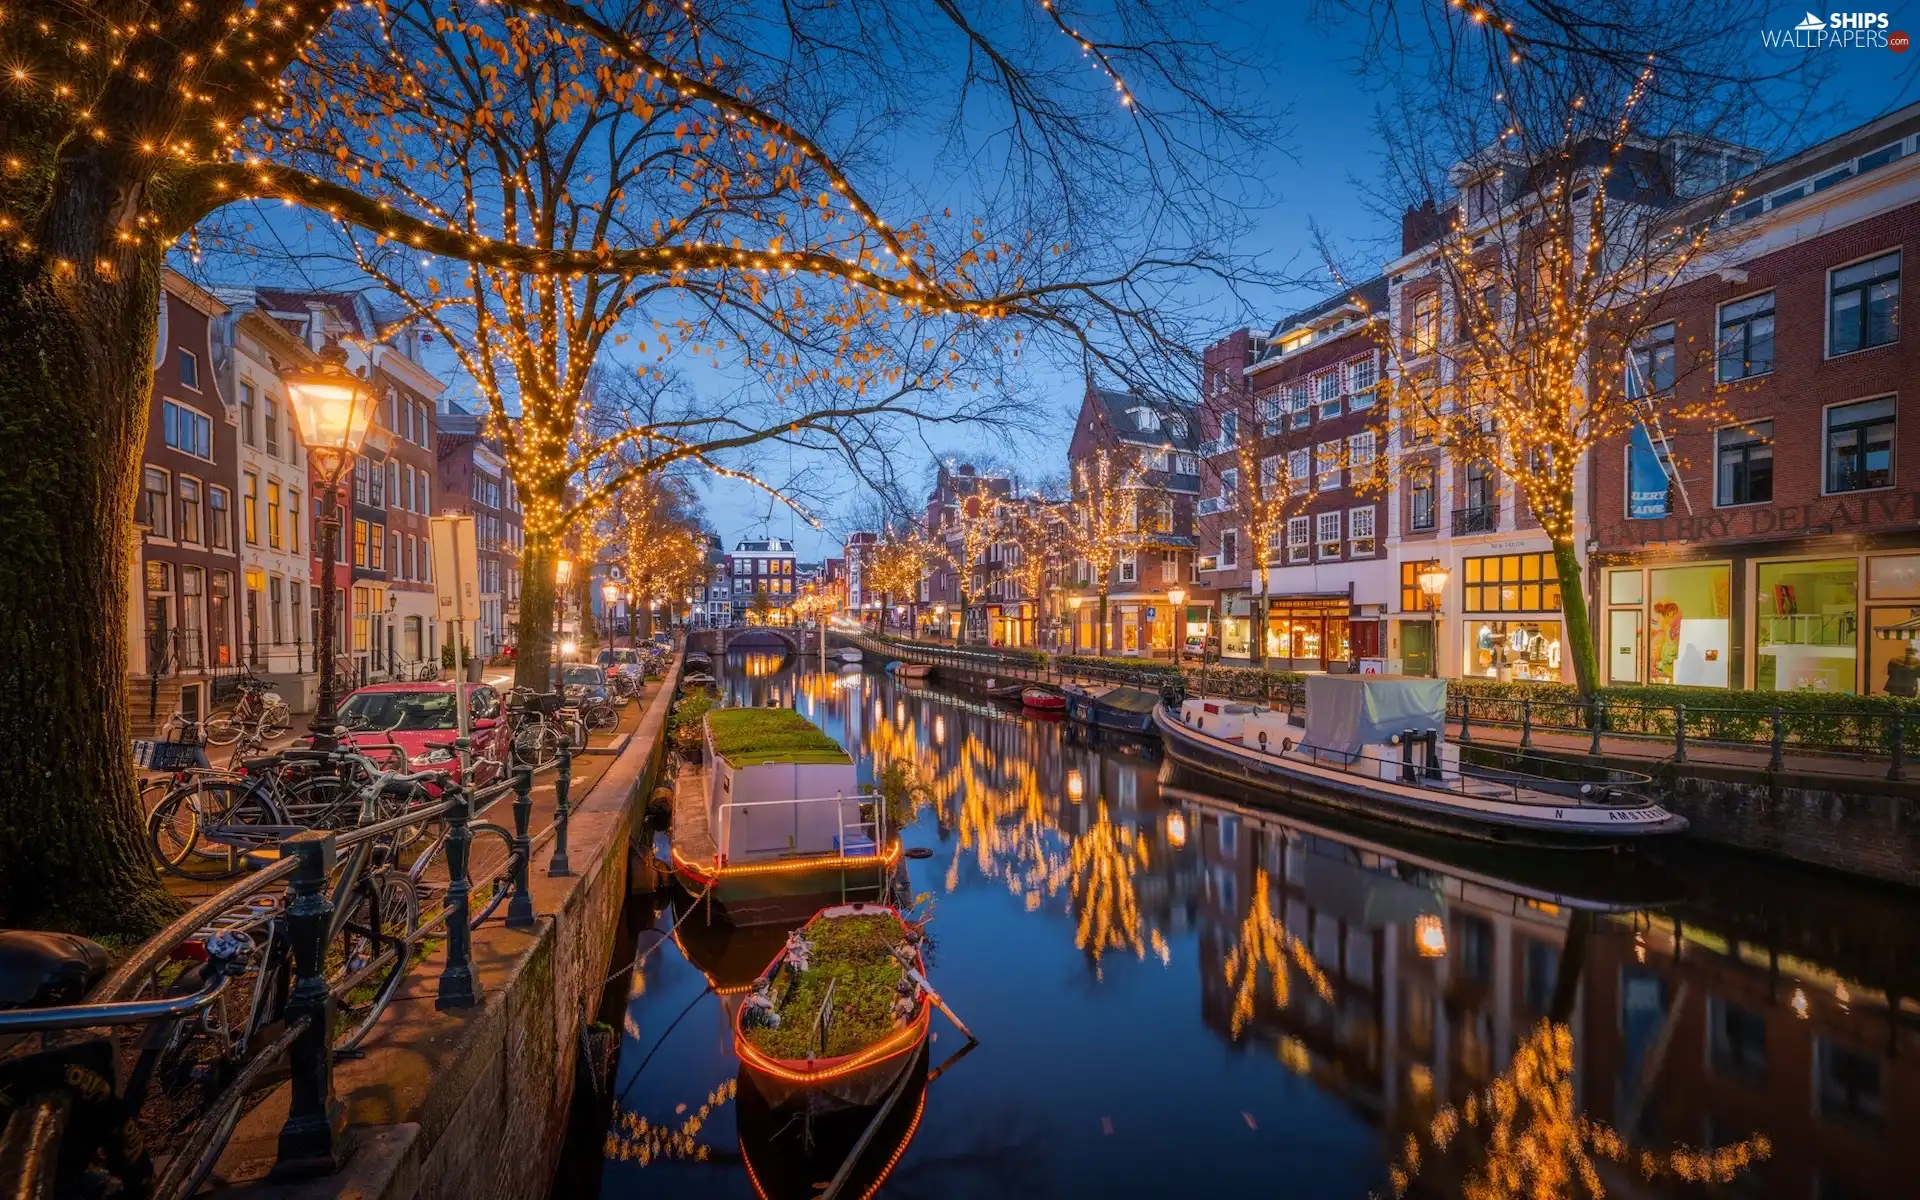 Houses, canal, evening, Boat, lighting, Street, Amsterdam, Lamp